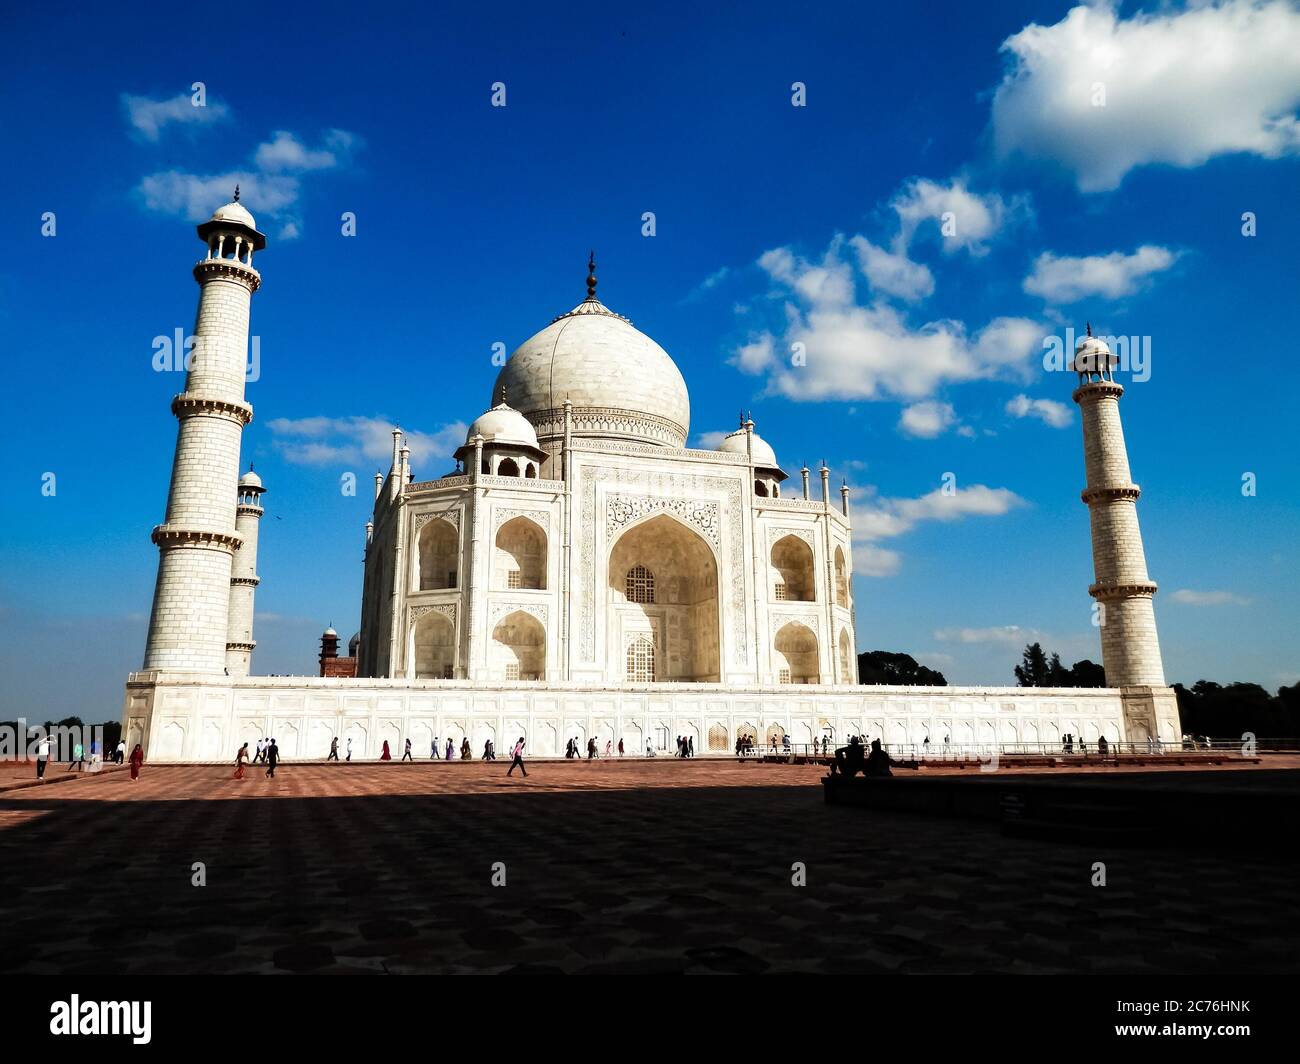 Taj Mahal in Agra, Uttar Pradesh, India. One of the New Seven Wonders of the World and one of India's most visited UNESCO world heritage sites. Stock Photo